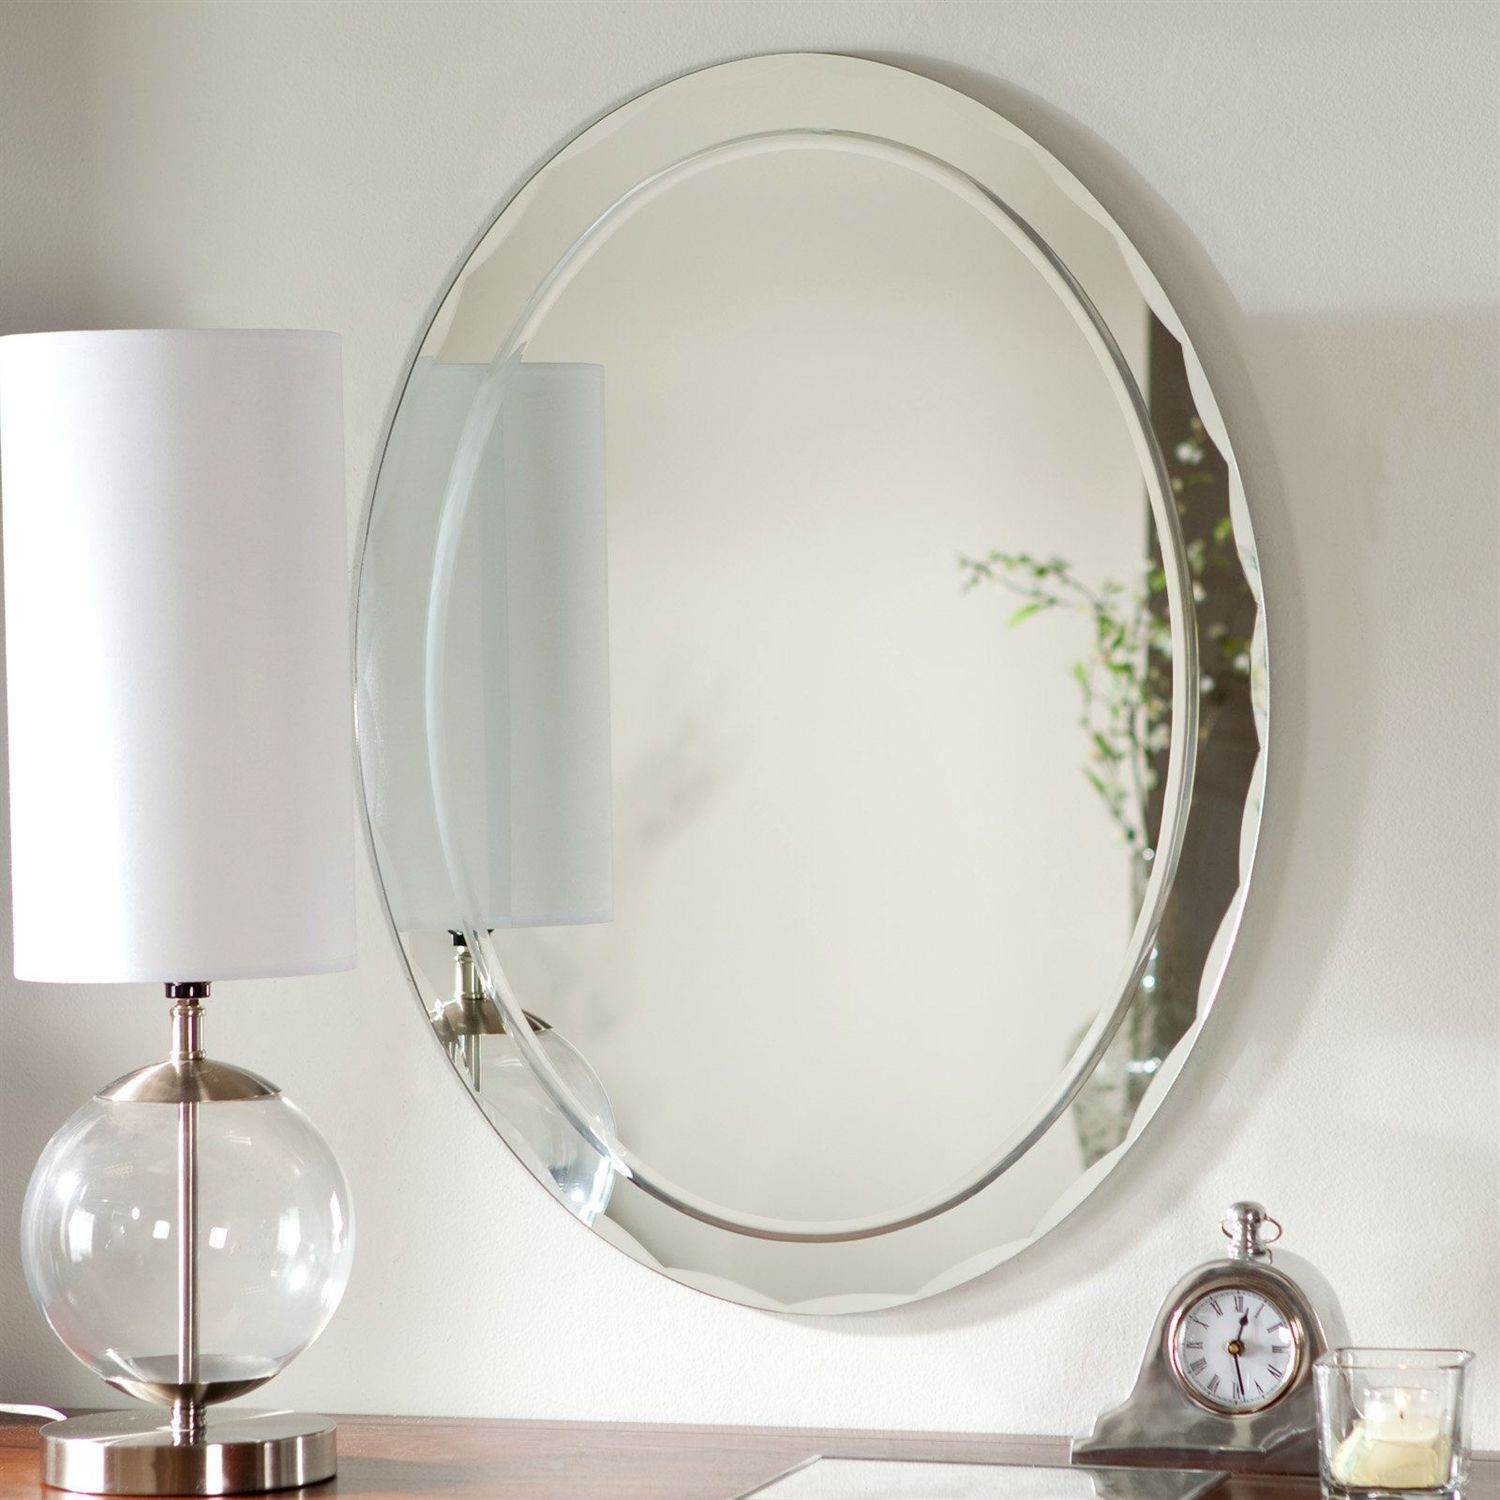 Favorite Frameless Tri Bevel Wall Mirrors In Oval Frameless Bathroom Vanity Wall Mirror With Beveled Edge Scallop Border (View 13 of 15)